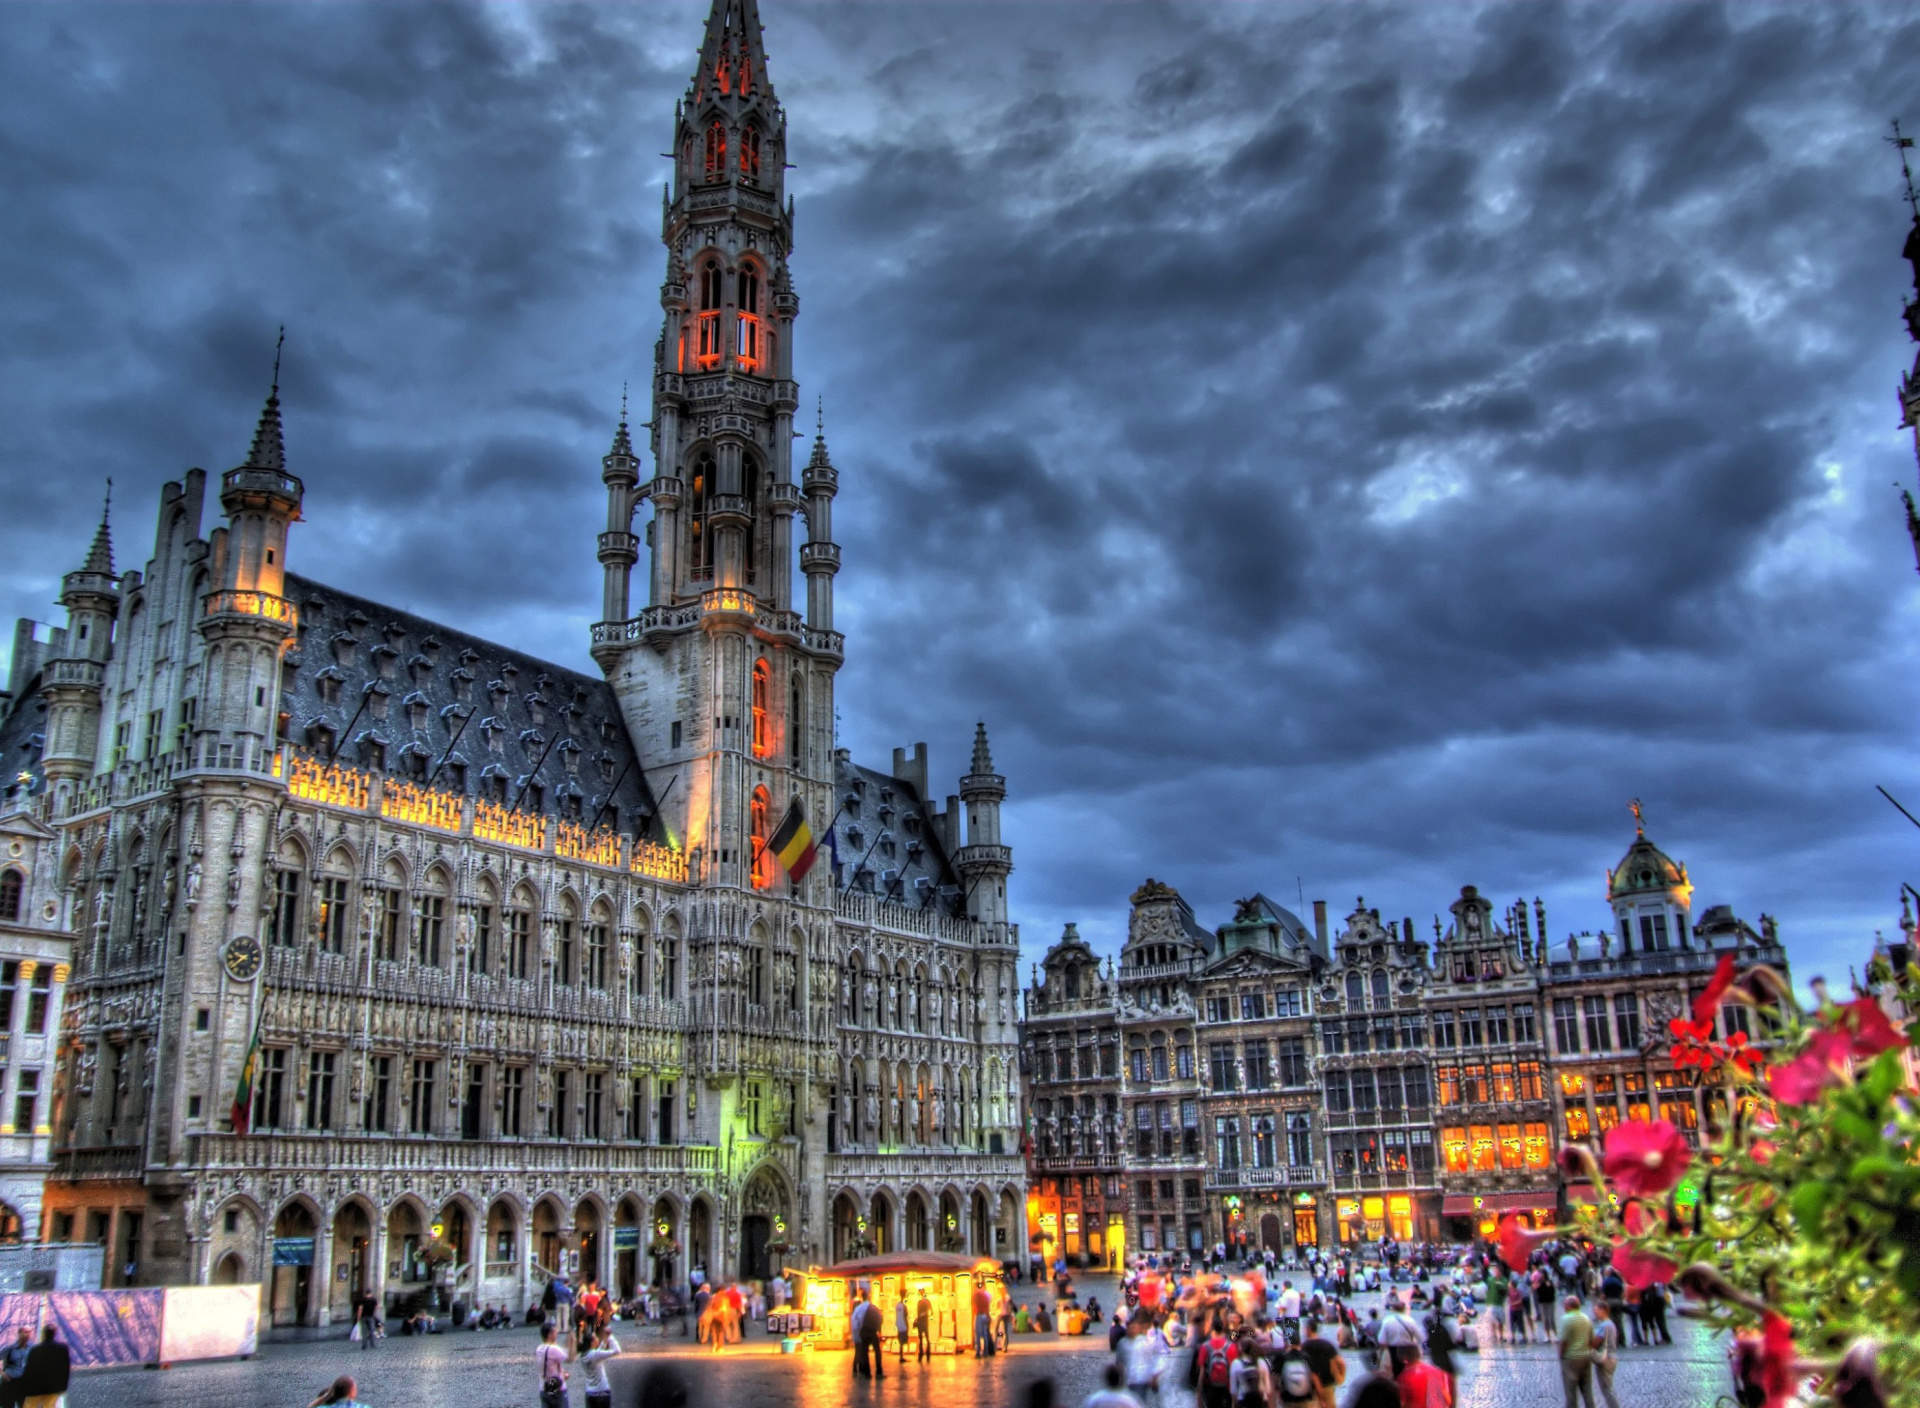 Brussels Grote Markt and Town Hall screenshot #1 1920x1408